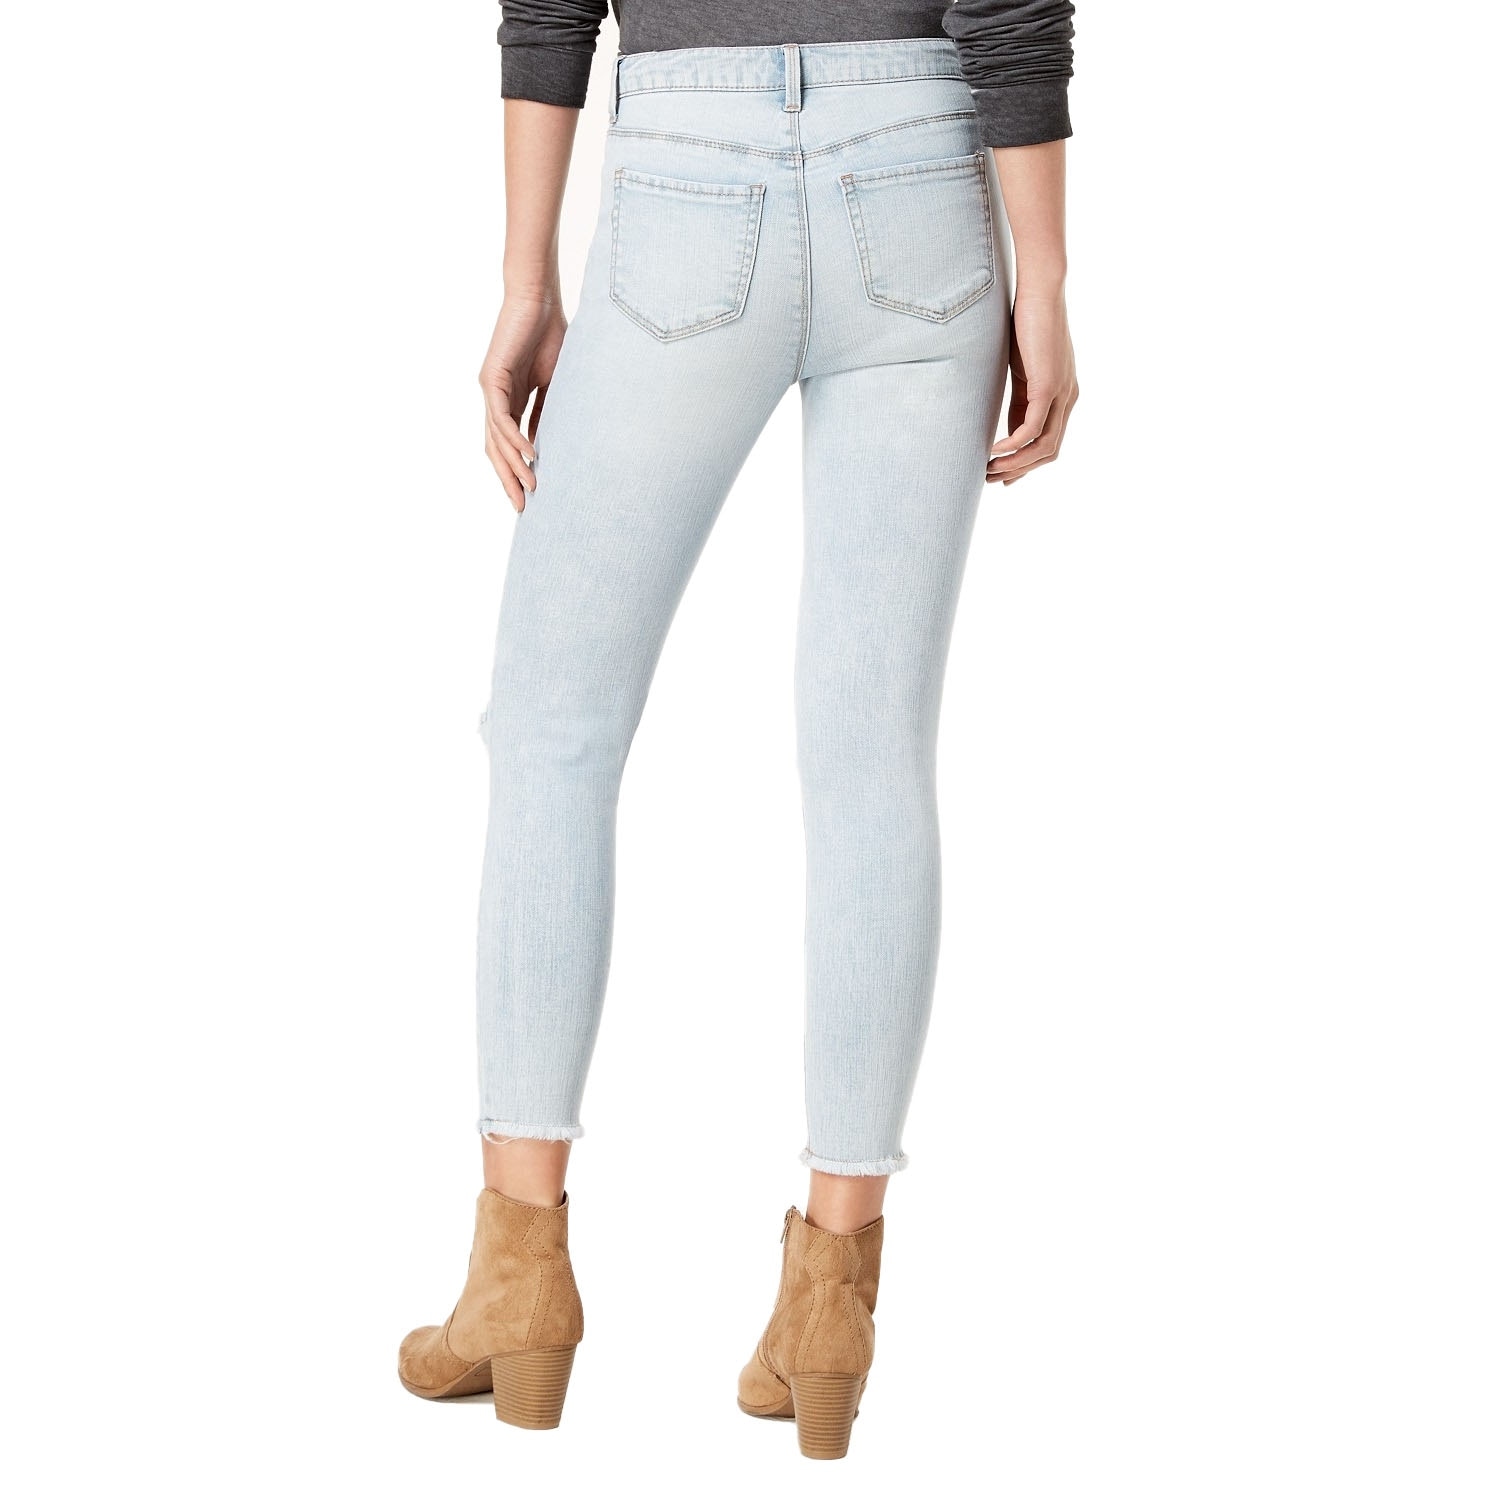 ankle length skinny jeans